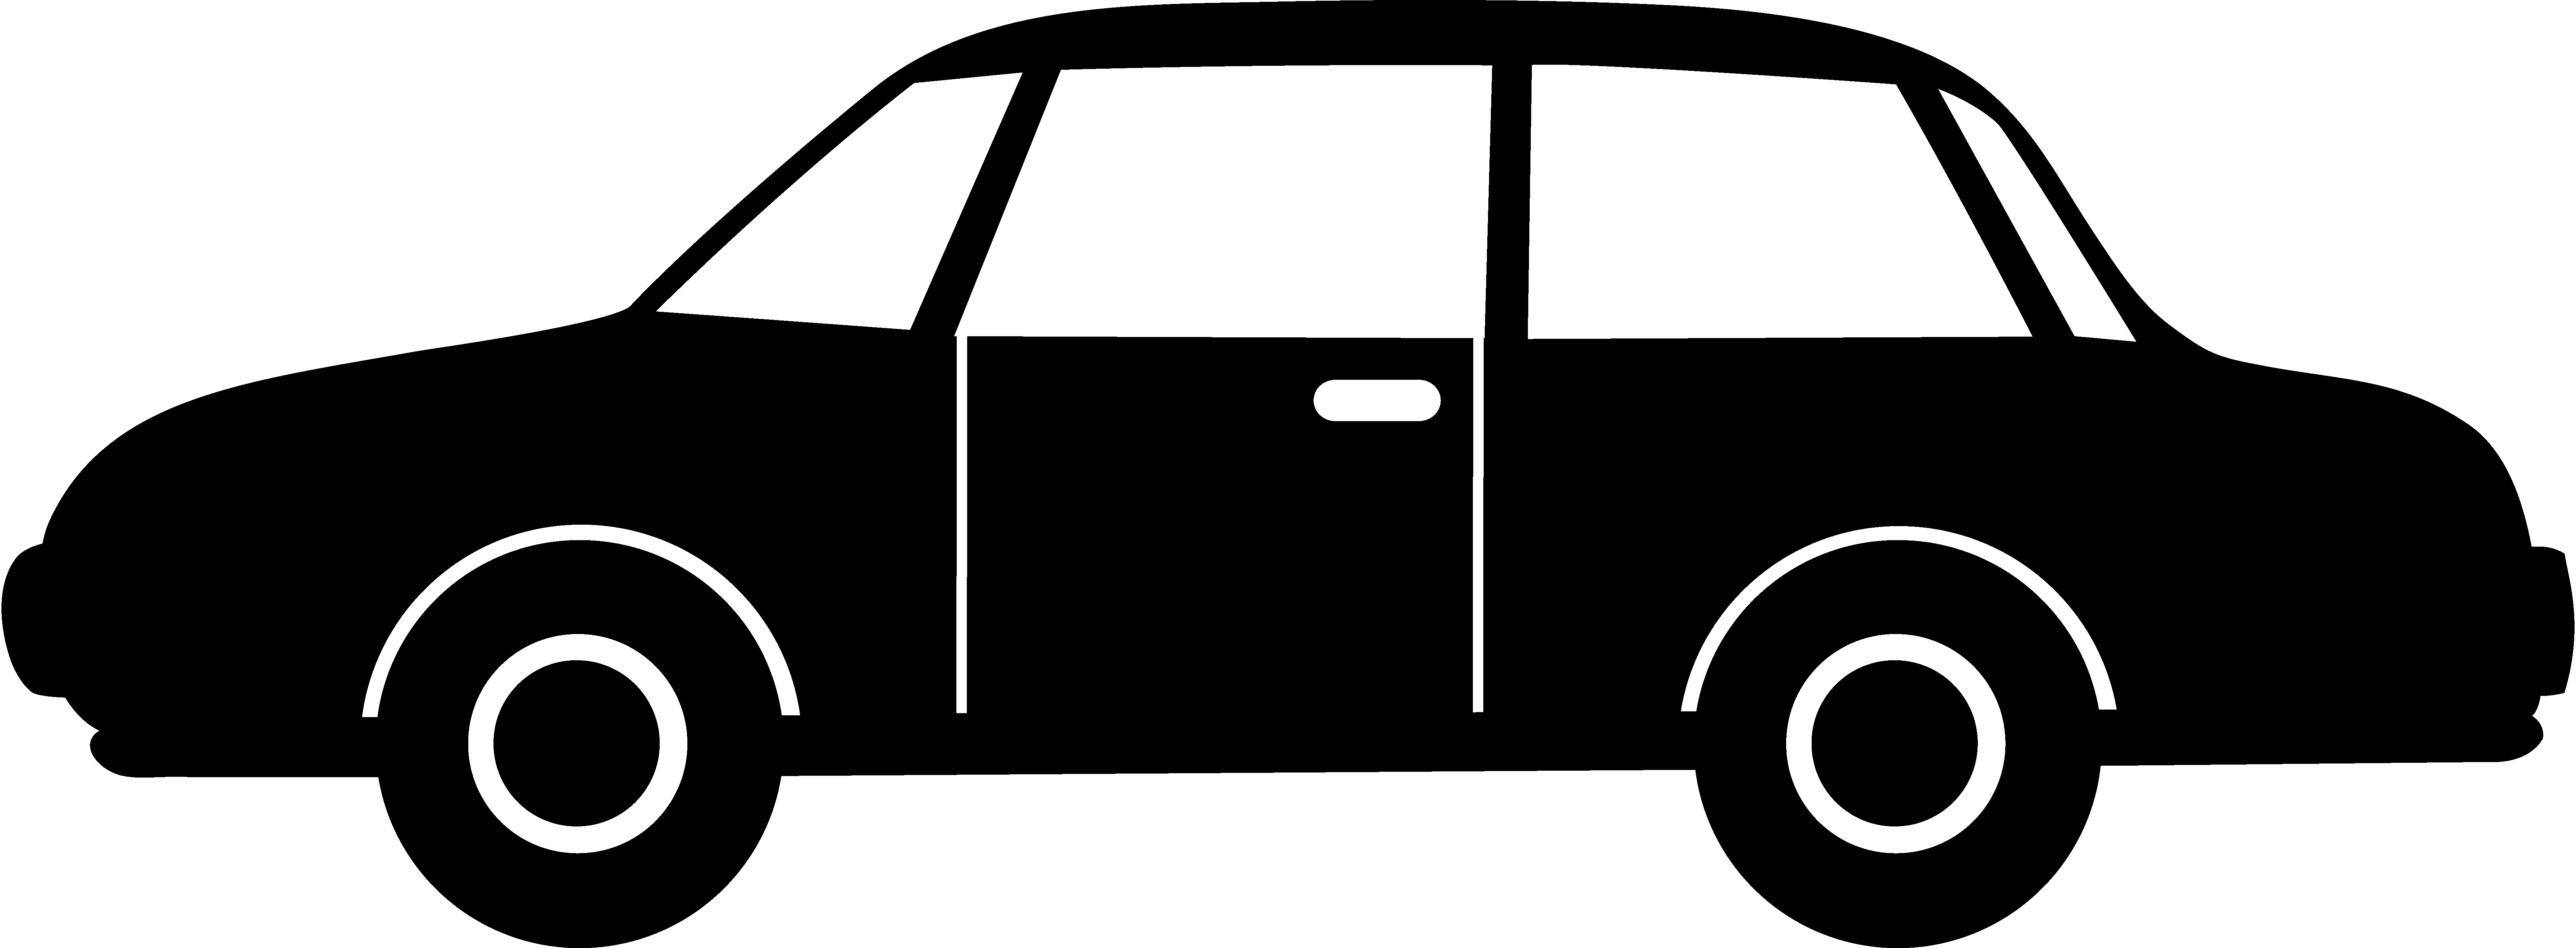 Car Clipart Side View | Clipart Panda - Free Clipart Images